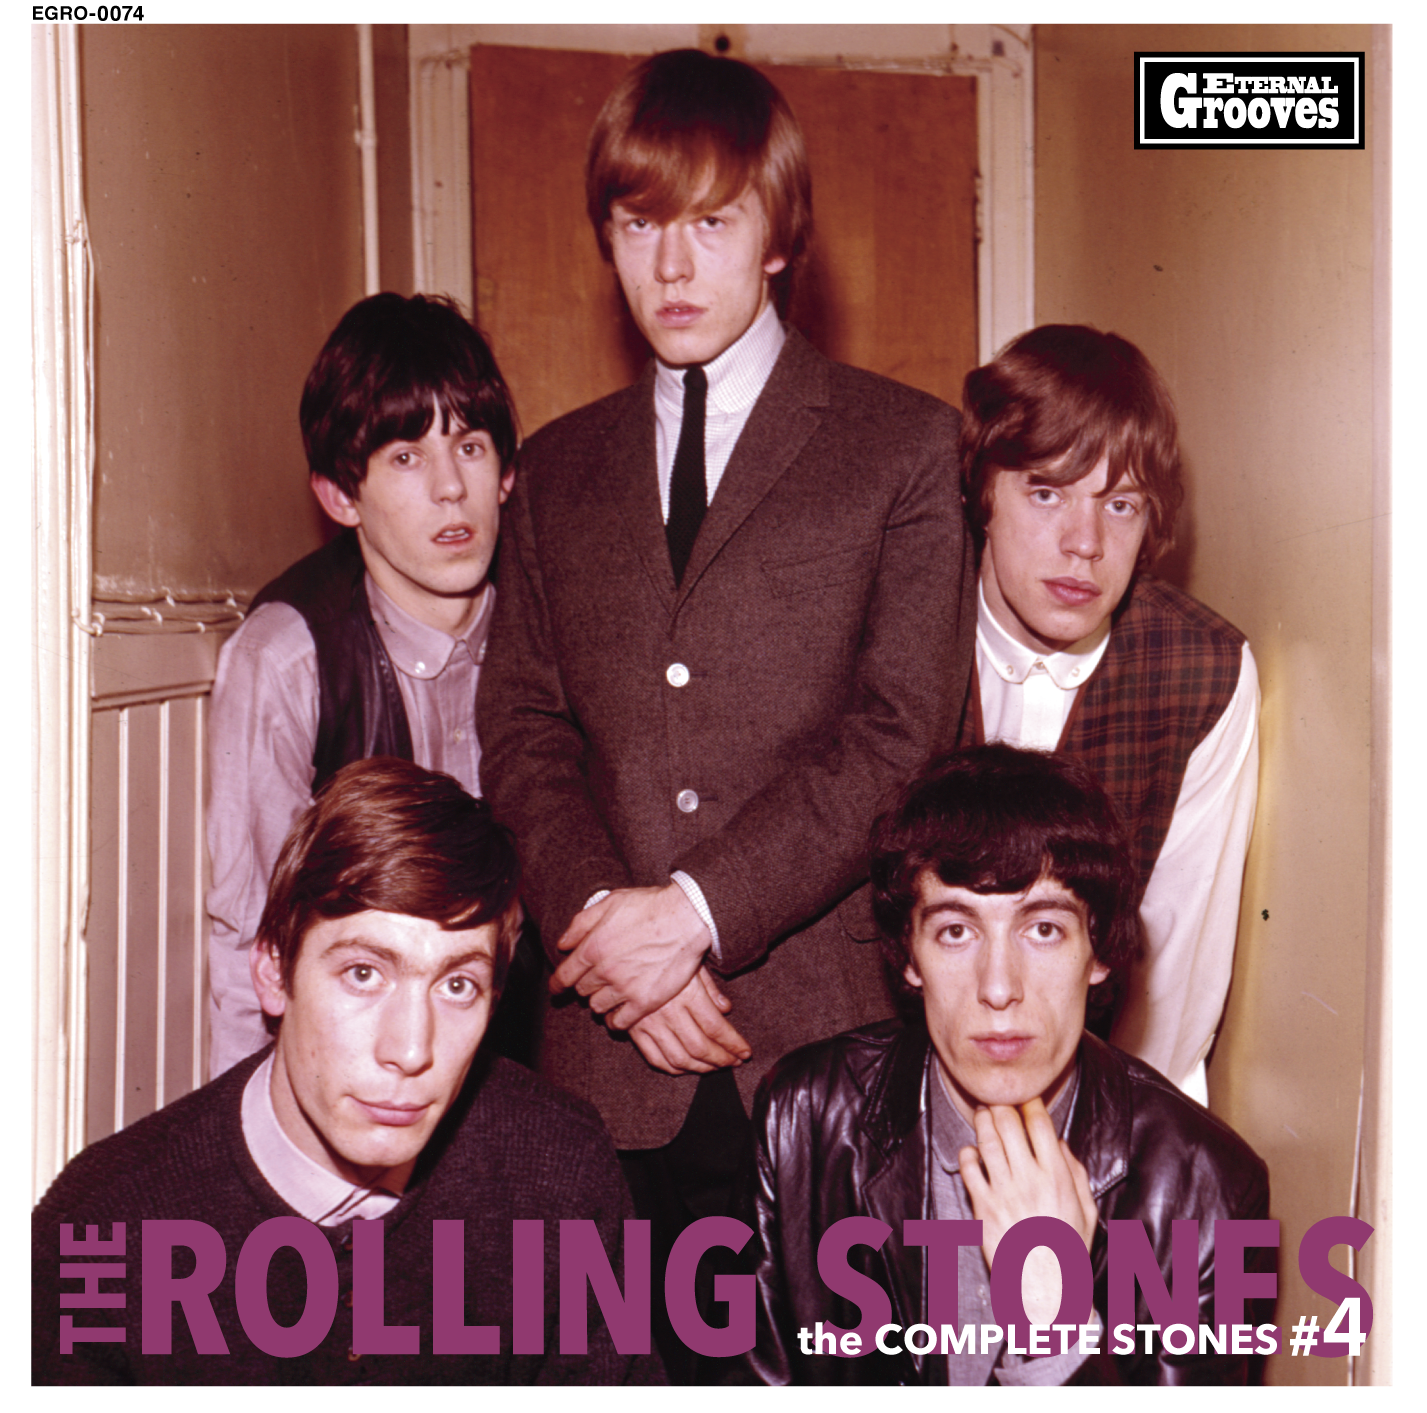 The Rolling Stones / the COMPLETE STONES #4